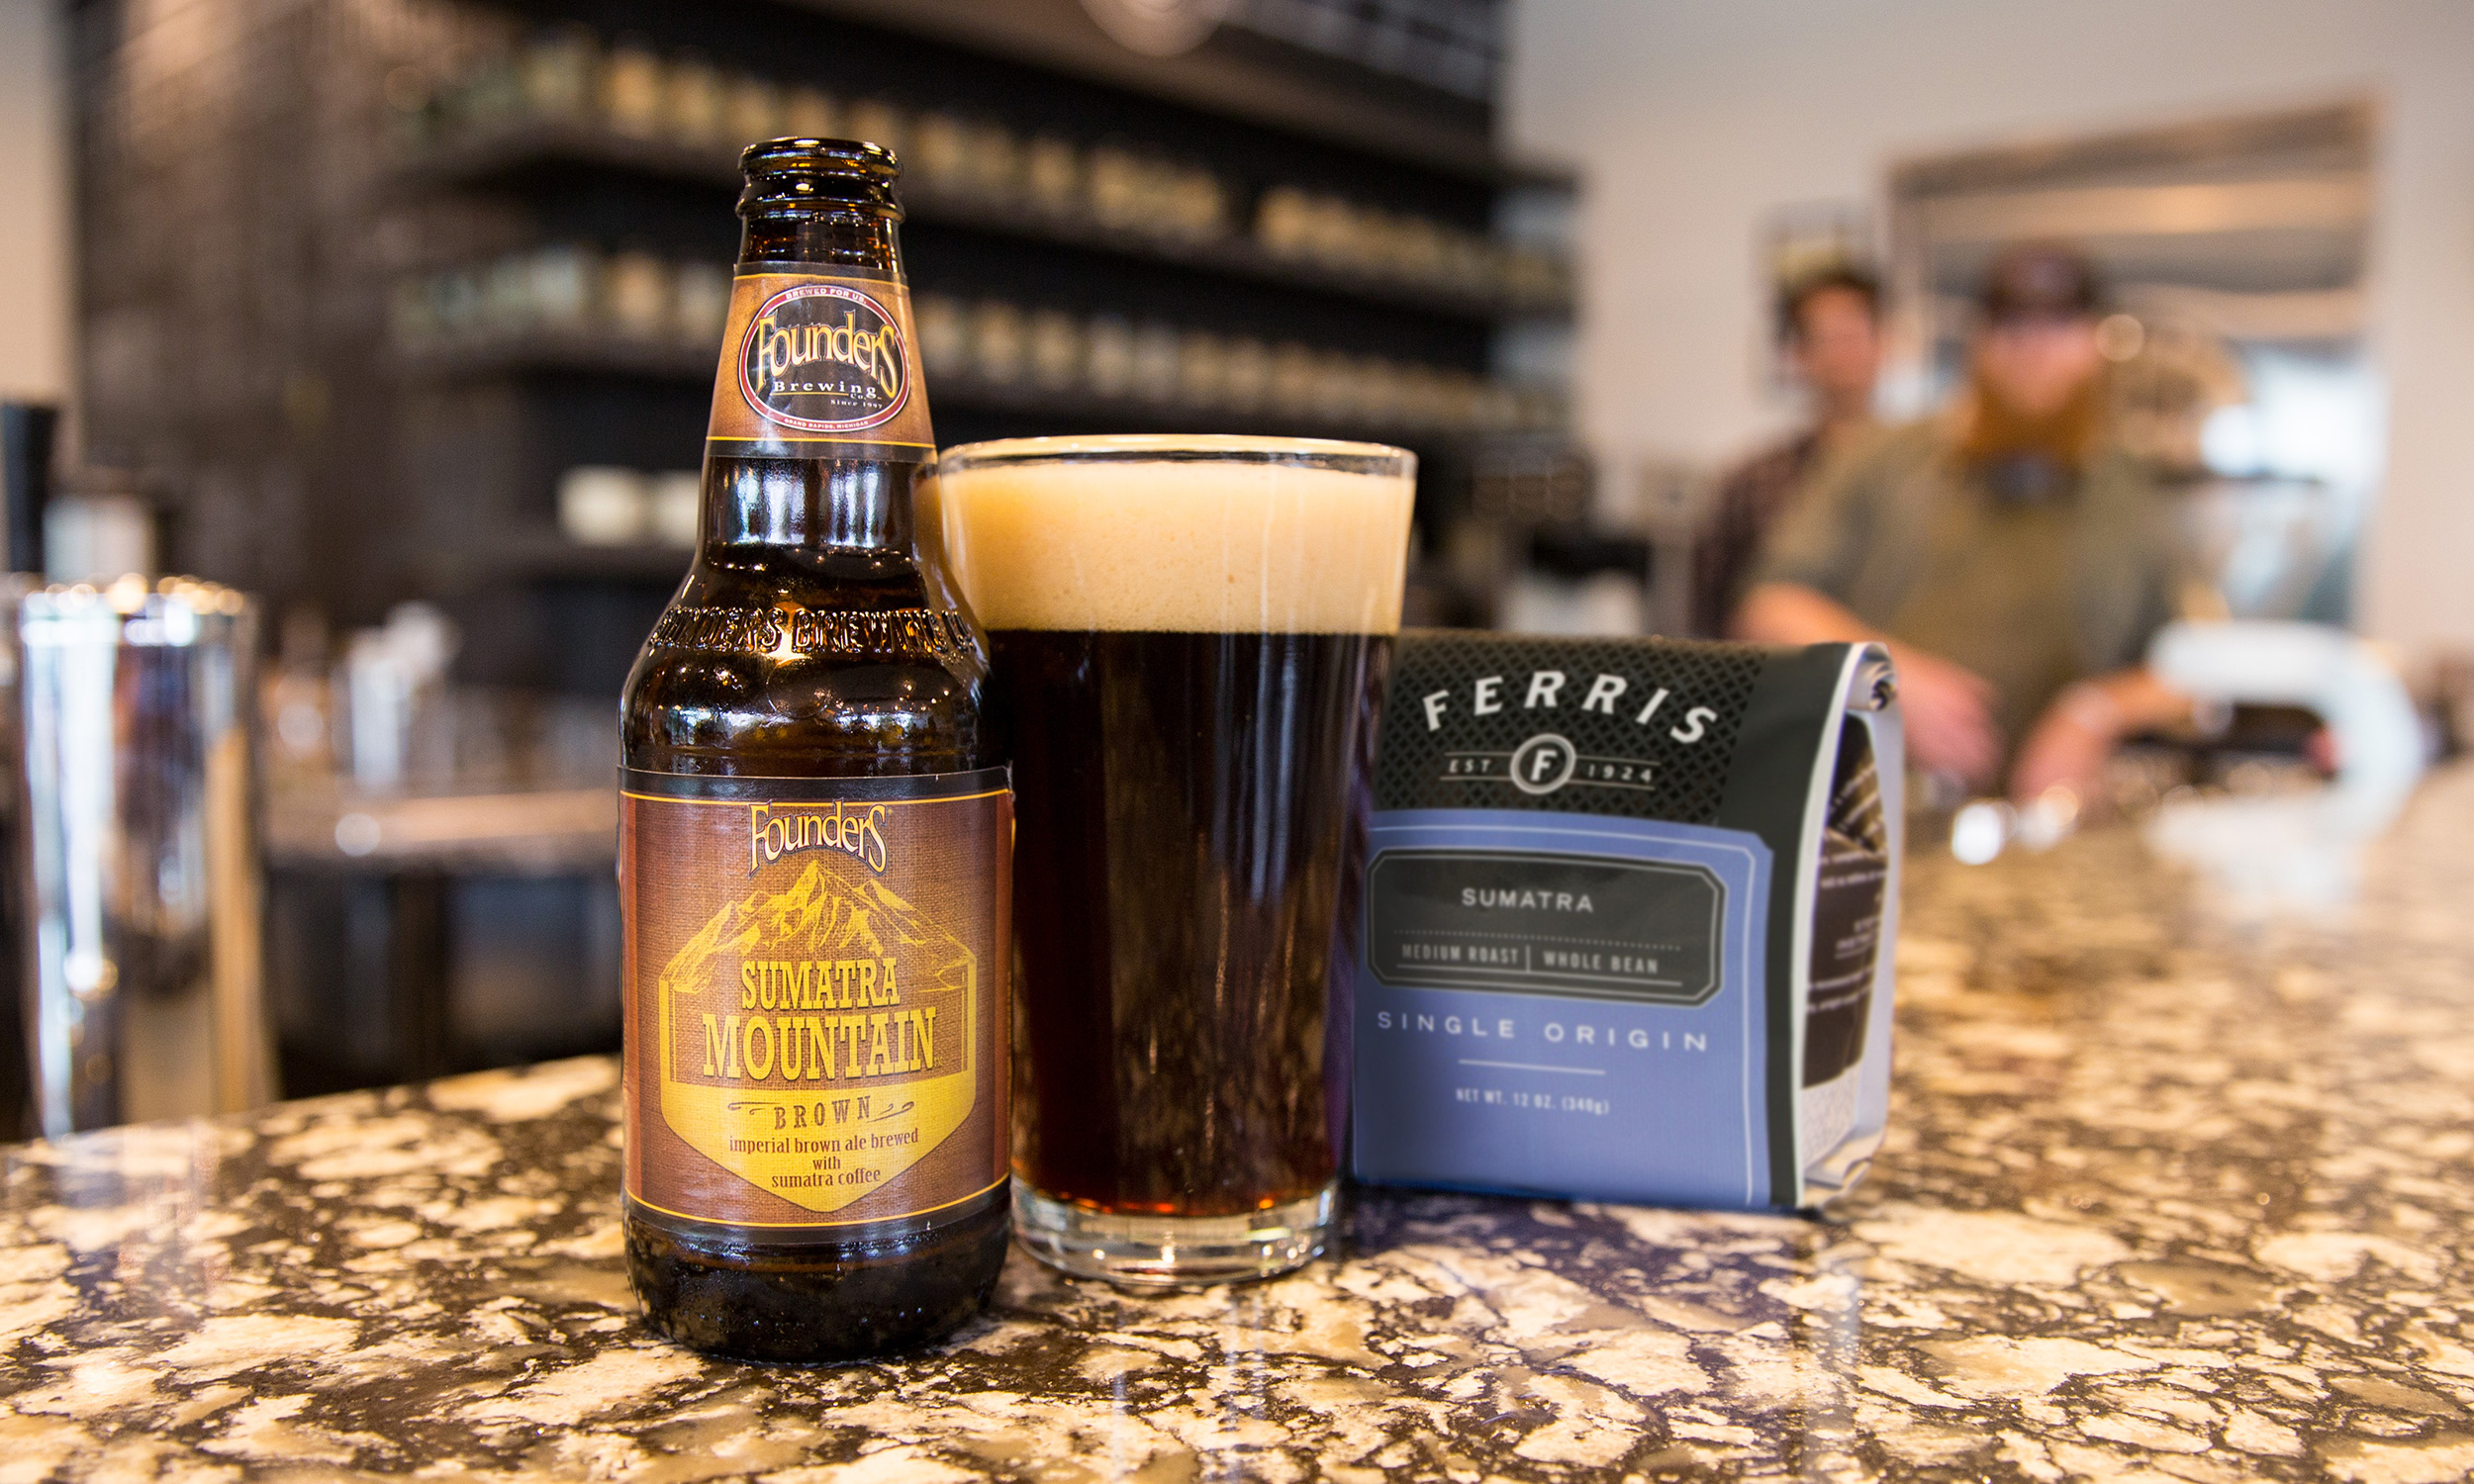 Sumatra Mountain Brown bottle and pour with a Ferris Coffee bag